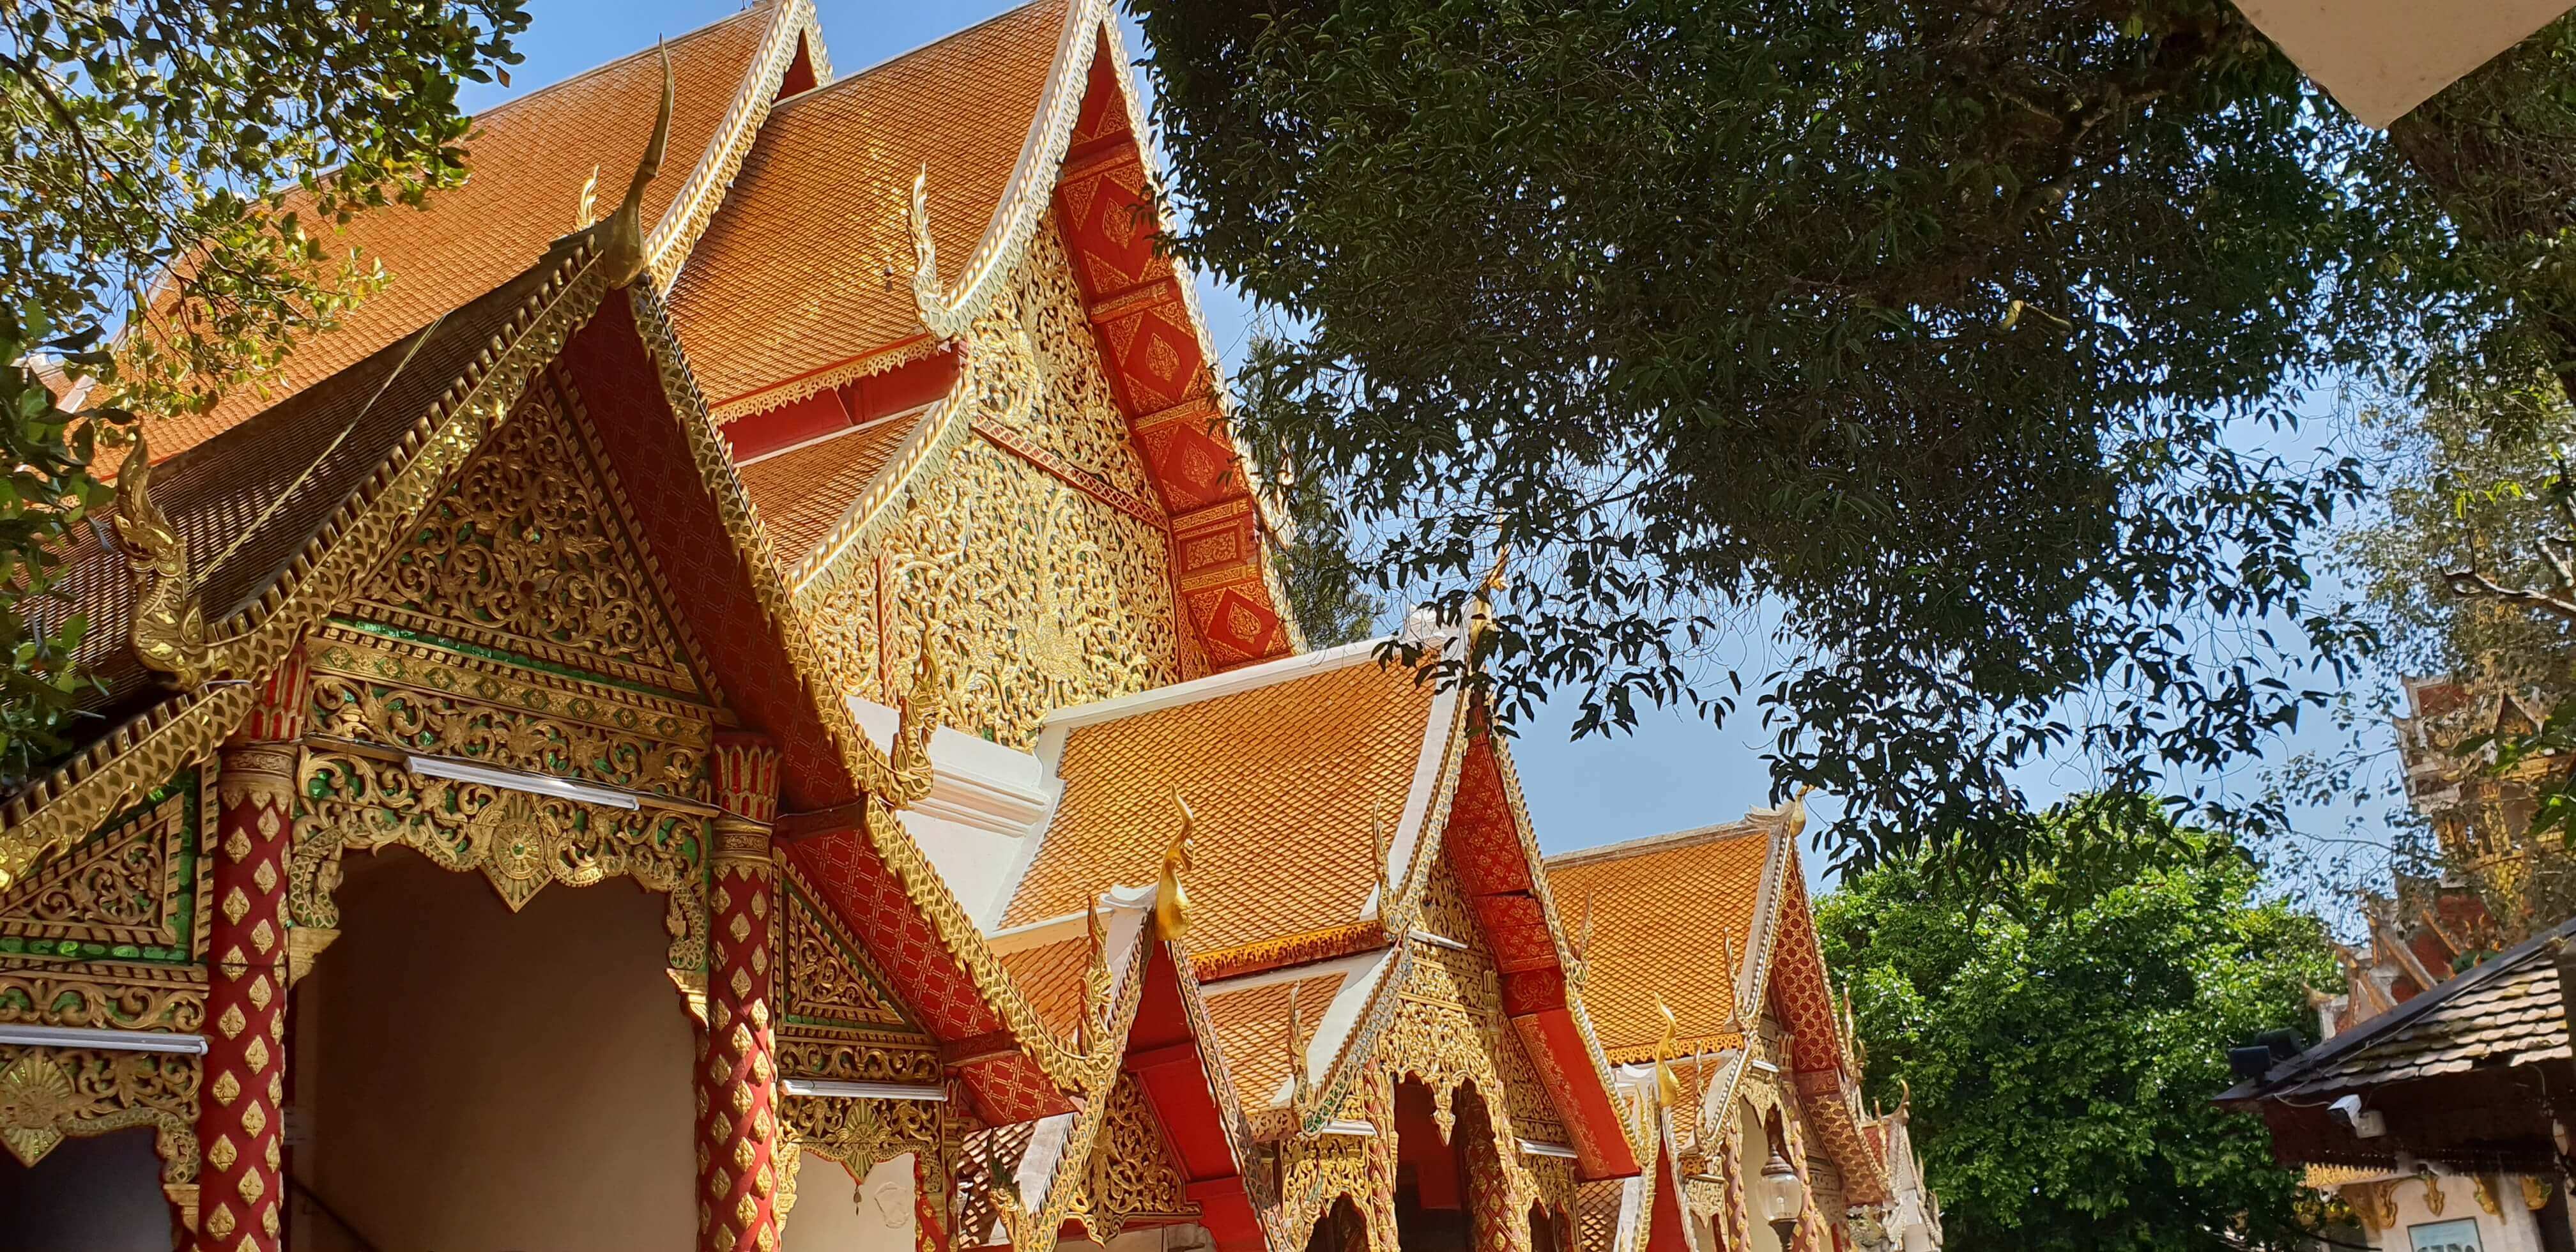 Wat Phra That Doi Suthep has to feature in the list of places under "What to do in Chiang Mai in 3 days"